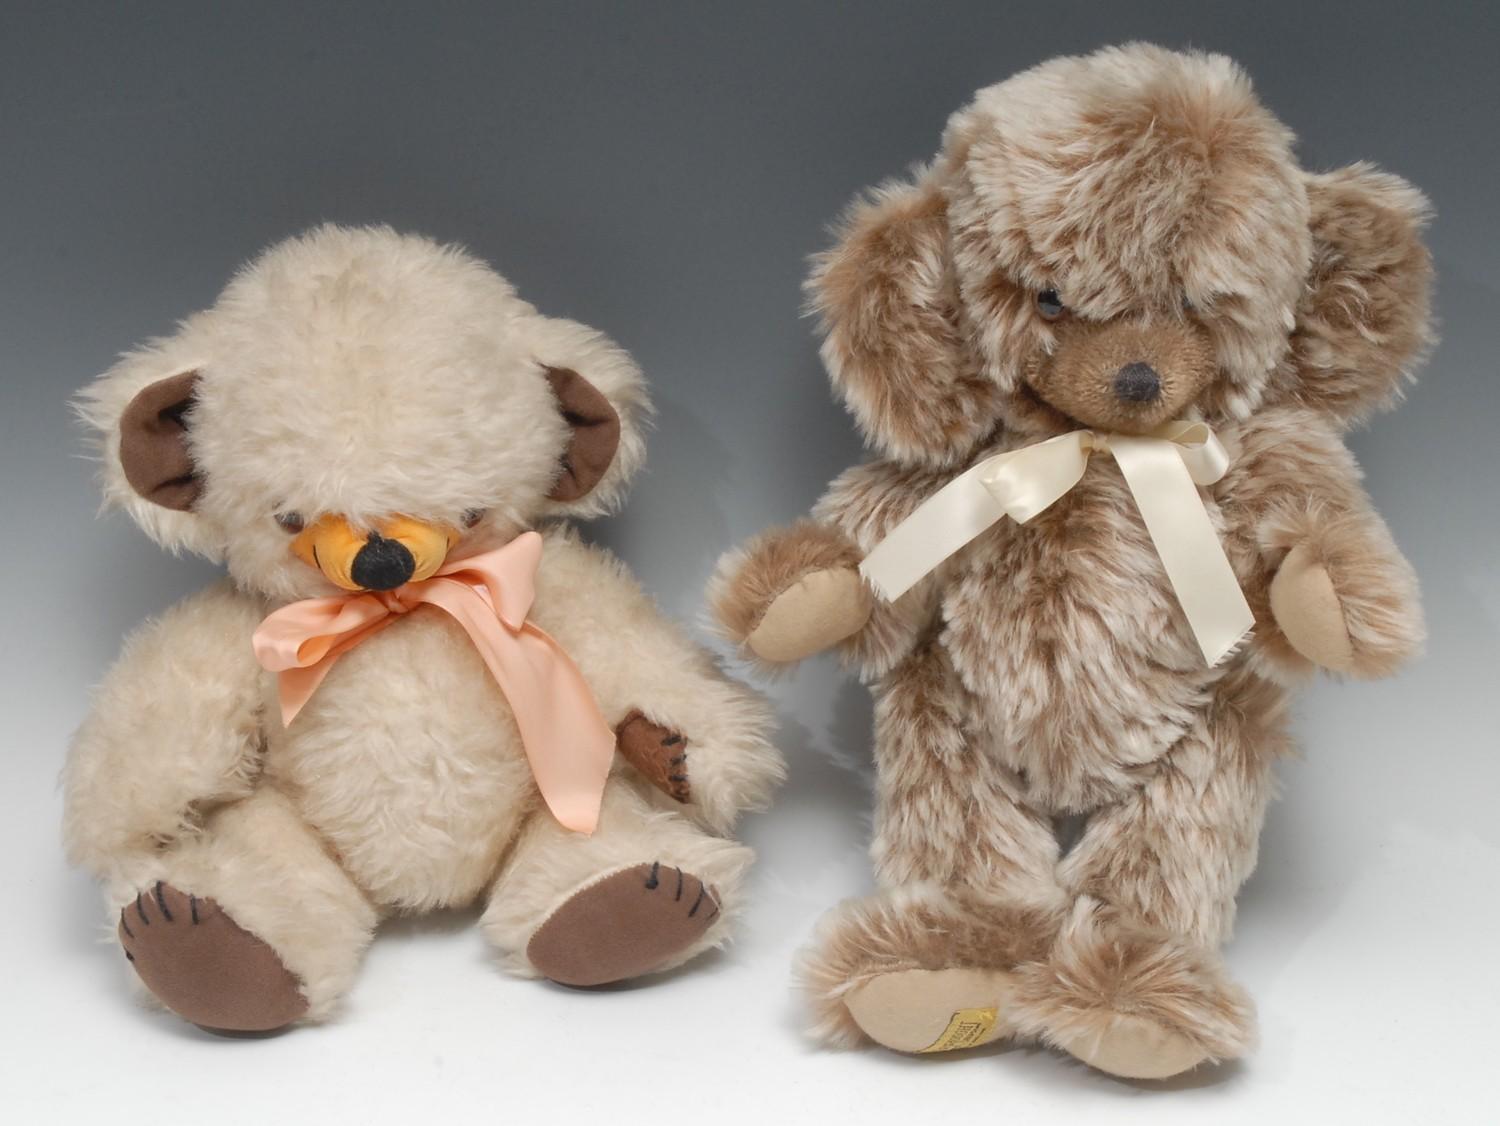 A Merrythought pale chocolate coloured mohair jointed Cheeky teddy bear, brown and black plastic